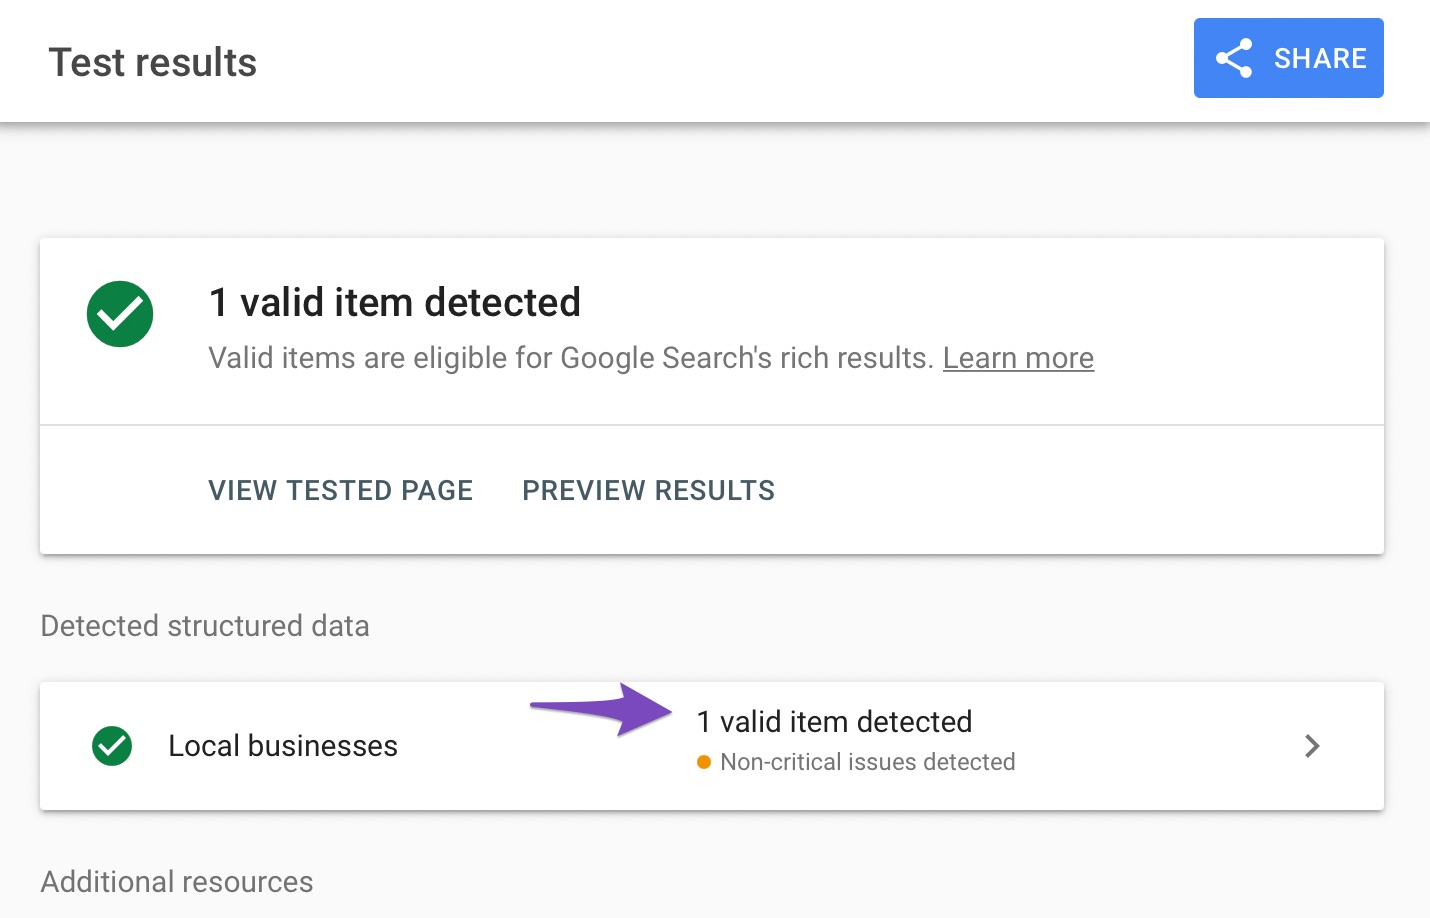 Click Detected structured data for more details